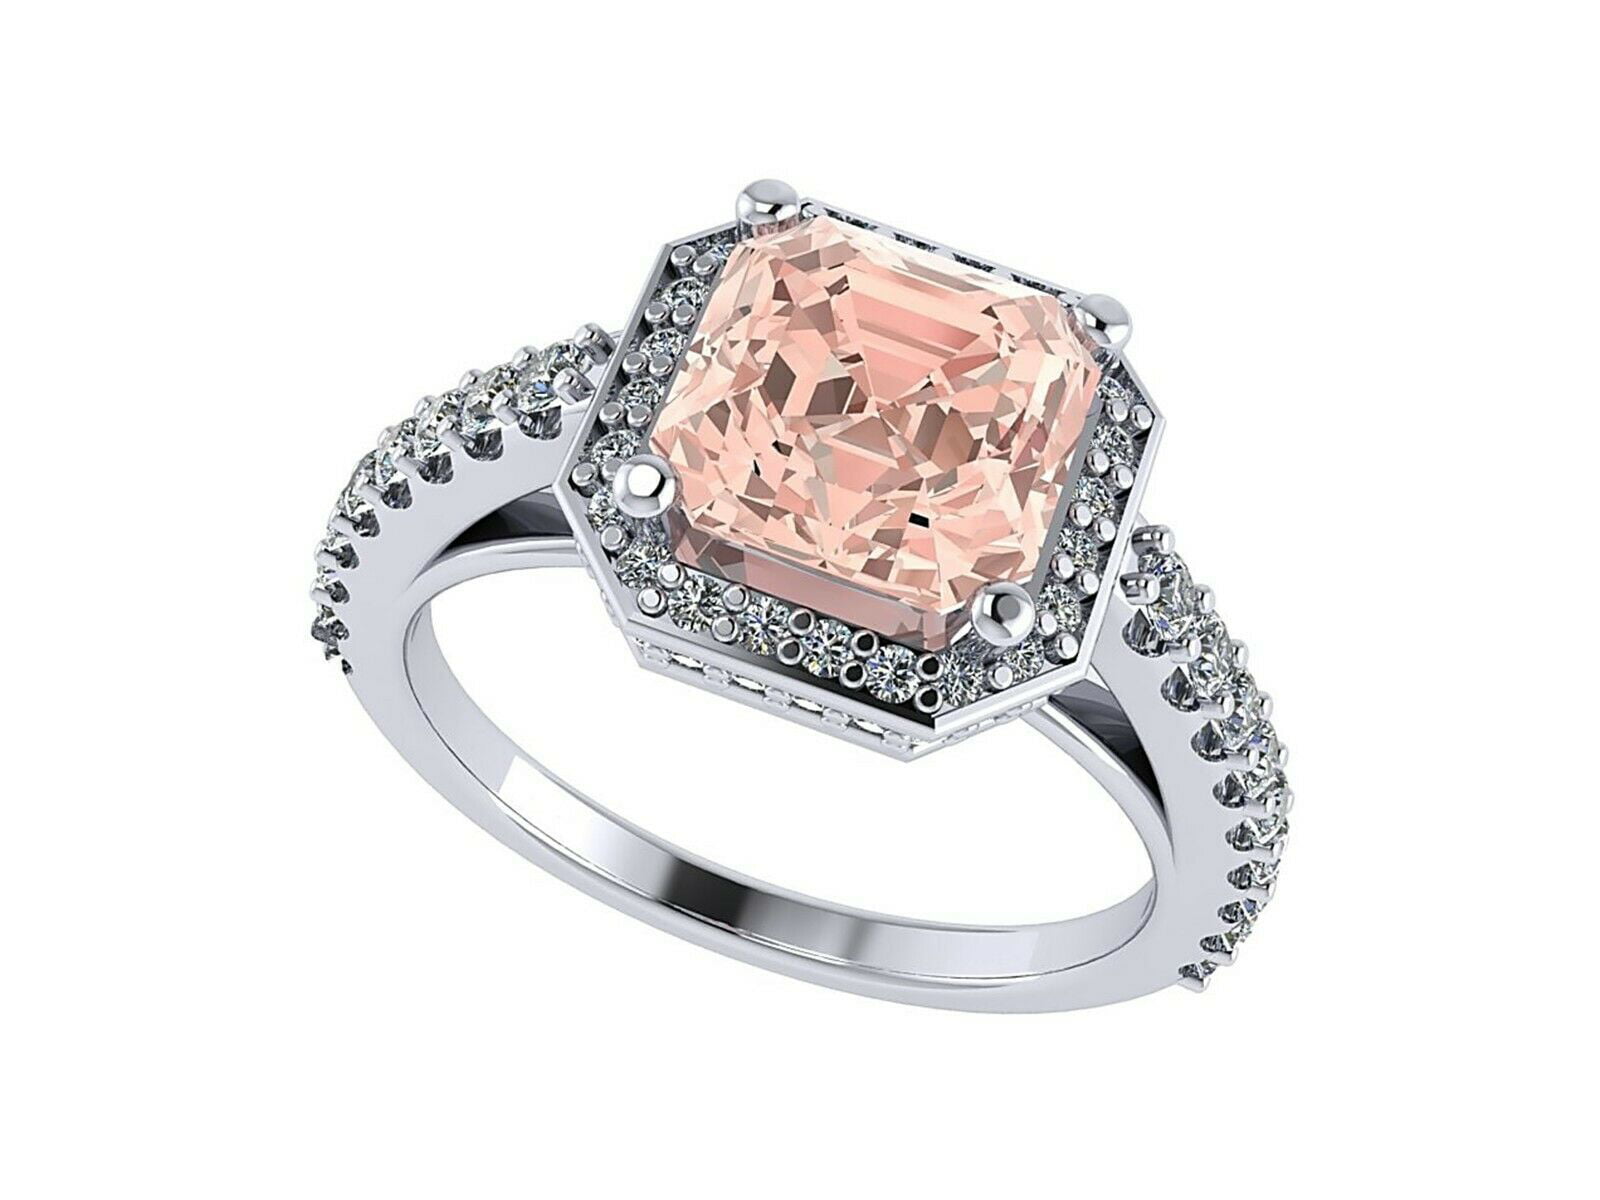 Details about   2.50Ct Pear Cut Morganite Diamond Solitaire Engagement Ring 14K Rose Gold Finish